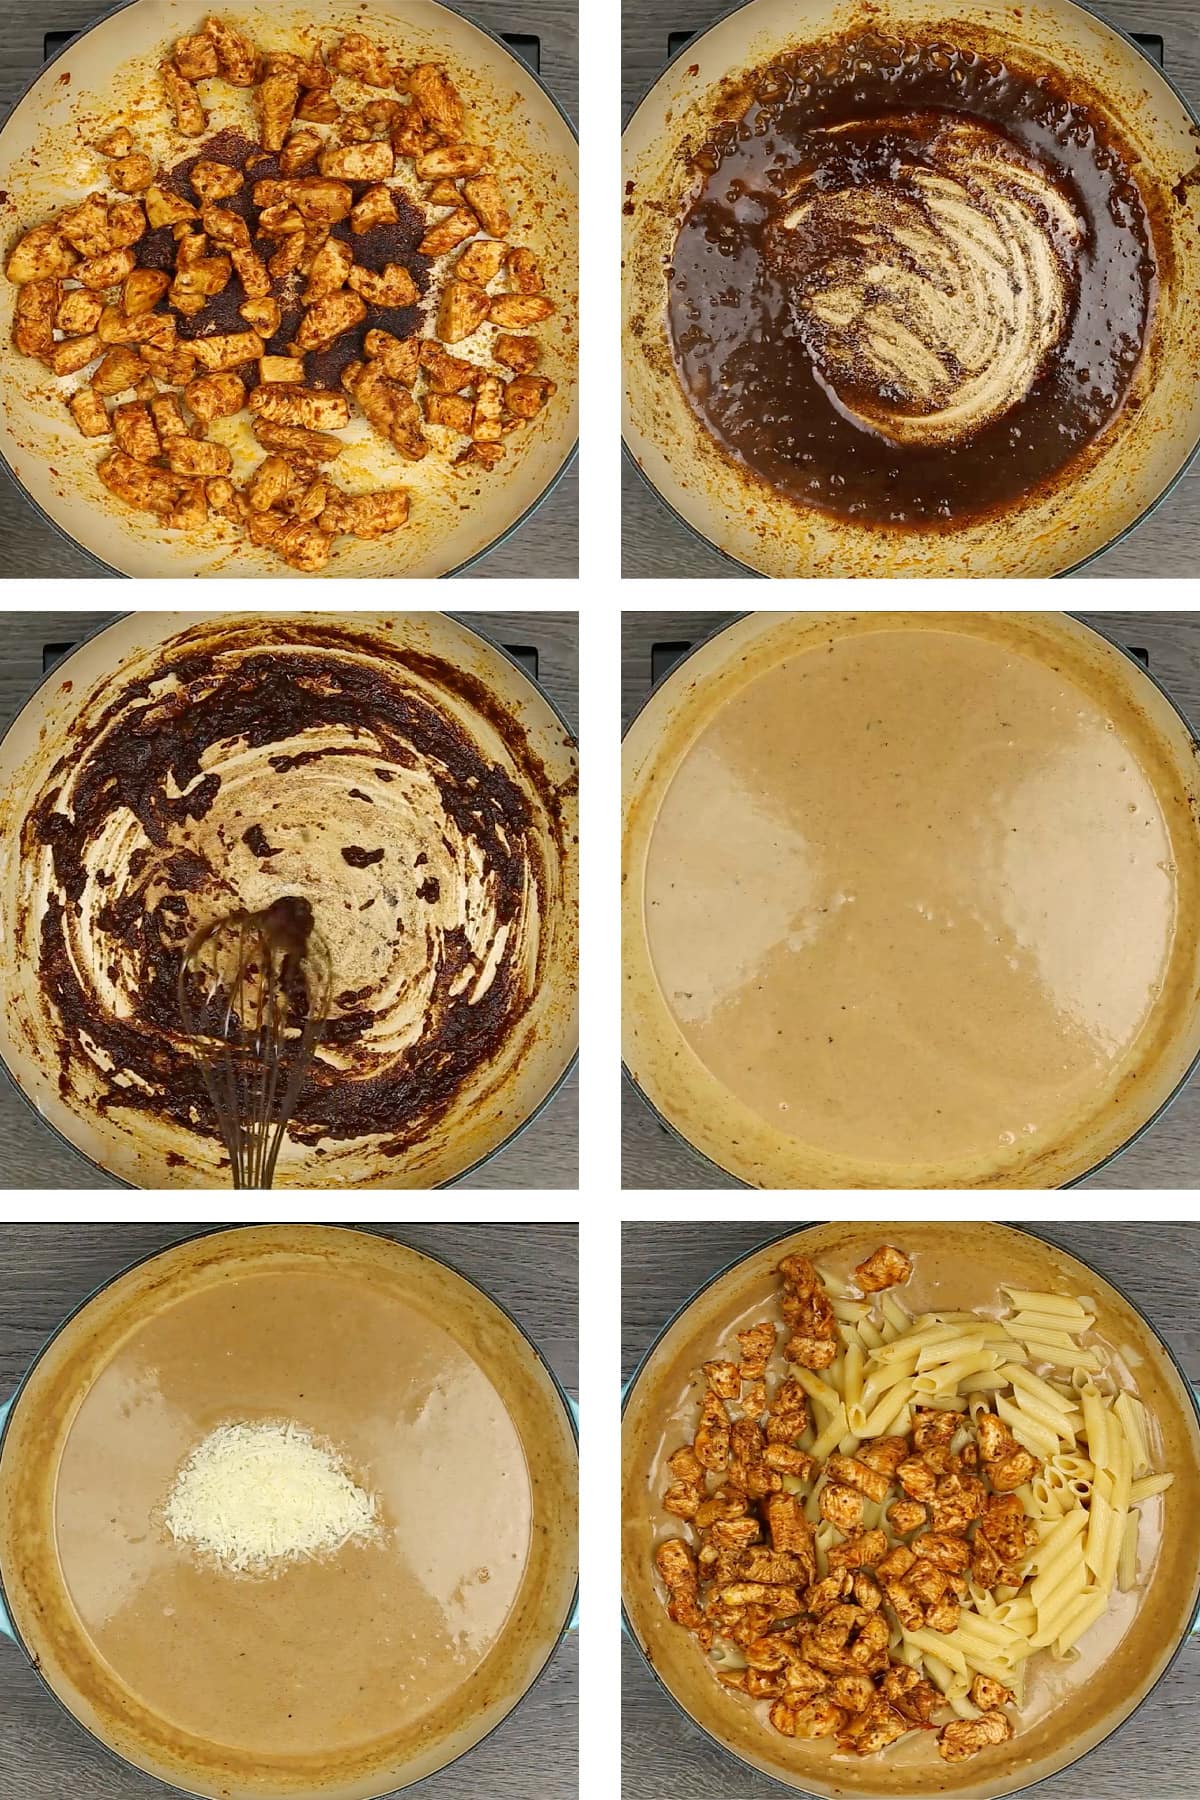 Collage of images depicting the steps for making cajun chicken pasta.